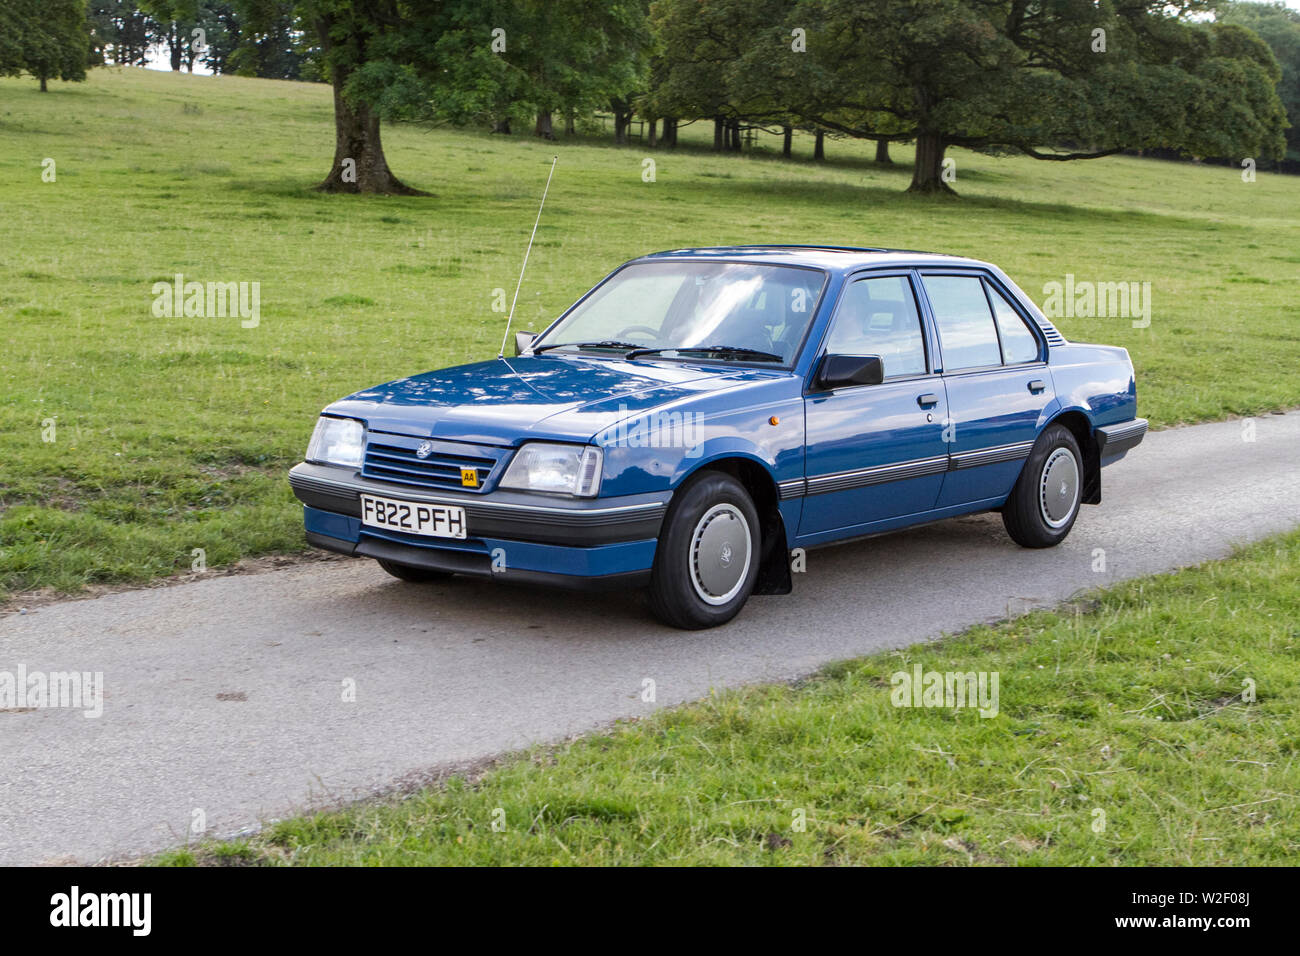 1988 80s Vauxhall Cavalier Gl Motoring classics, historics, vintage  motors & collectibles. collection of cars veteran vehicles of yesteryear. Stock Photo